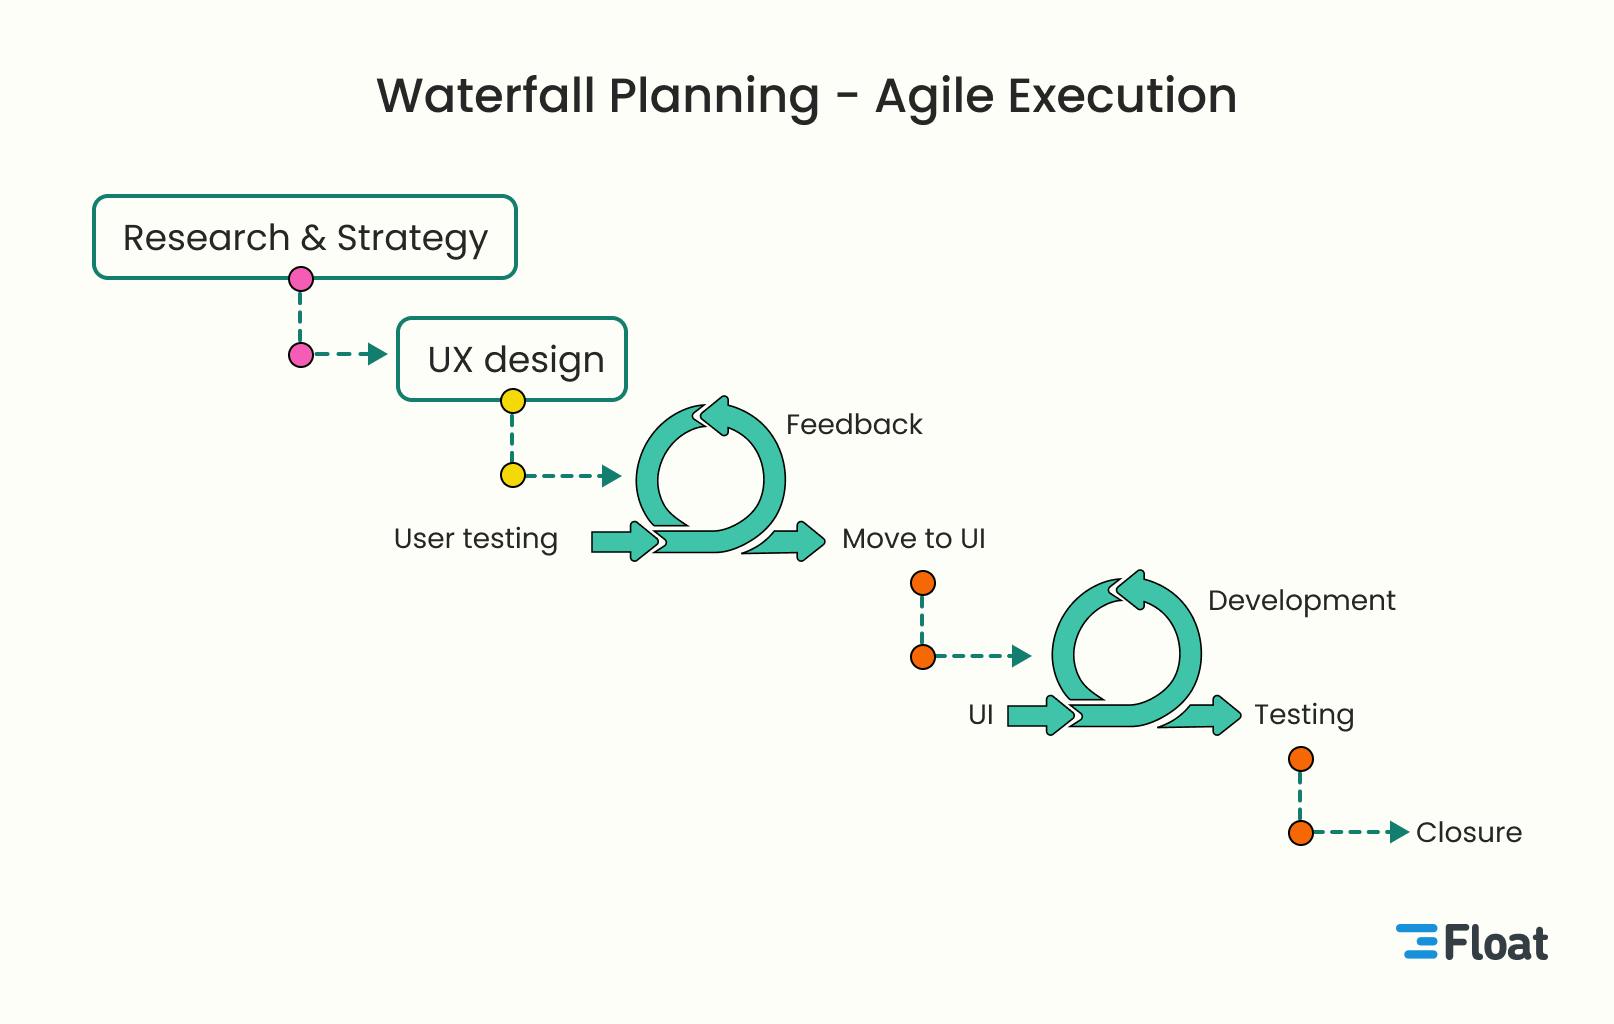 One example of hybrid project management with waterfall planning phases and agile execution phases